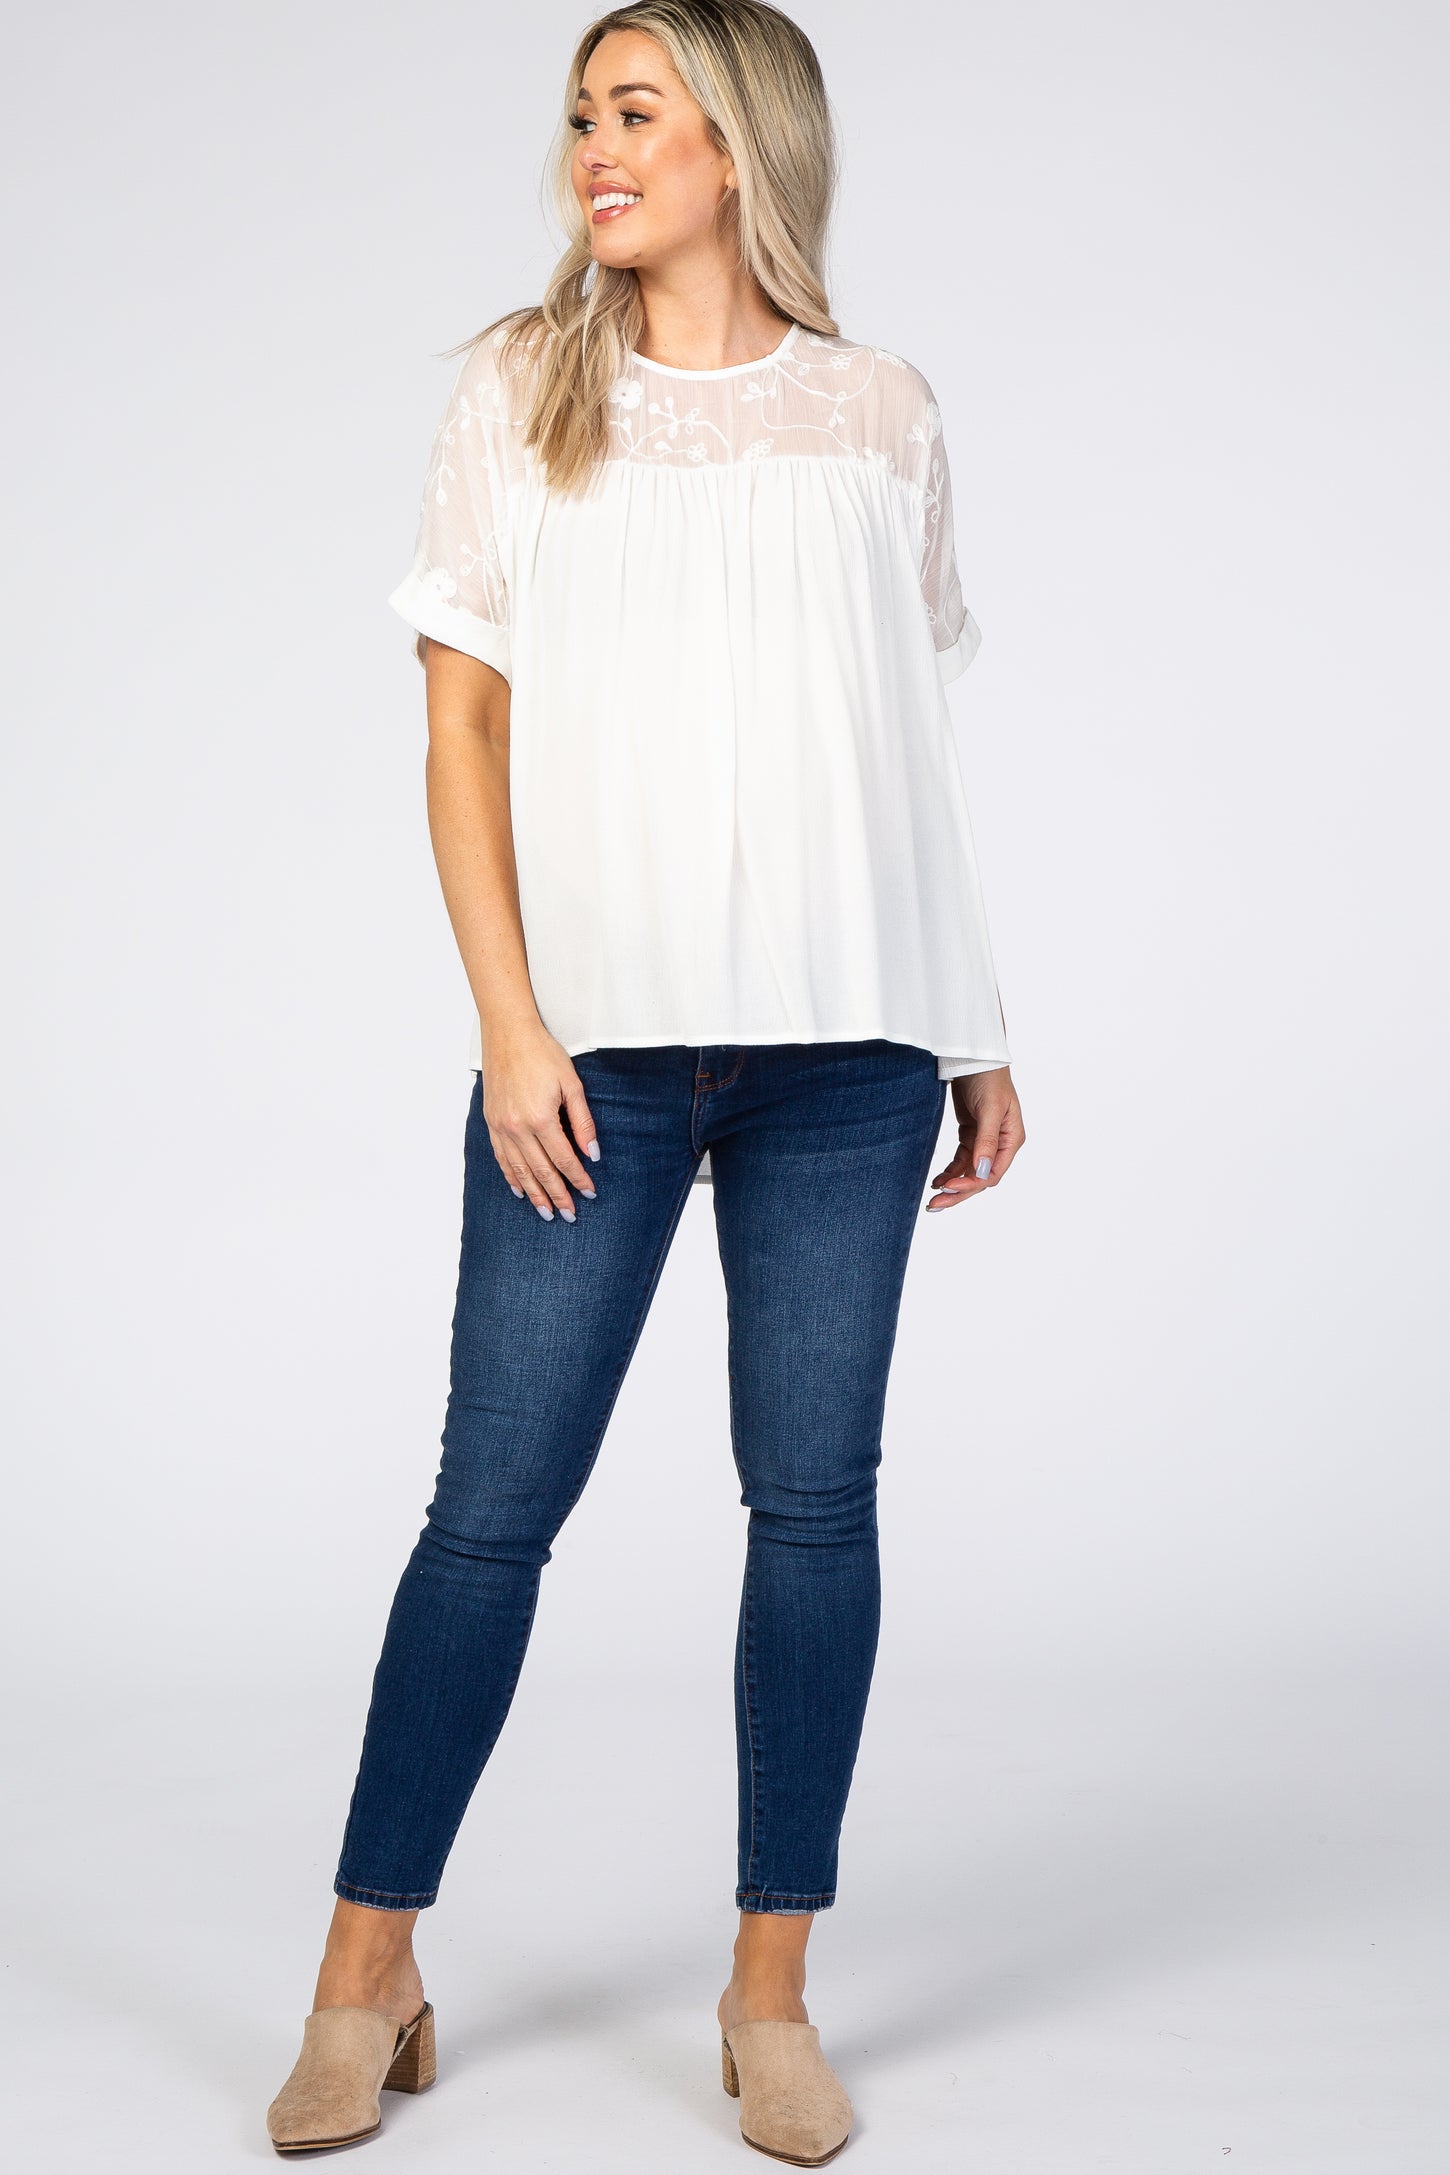 White Floral Embroidered Maternity Blouse